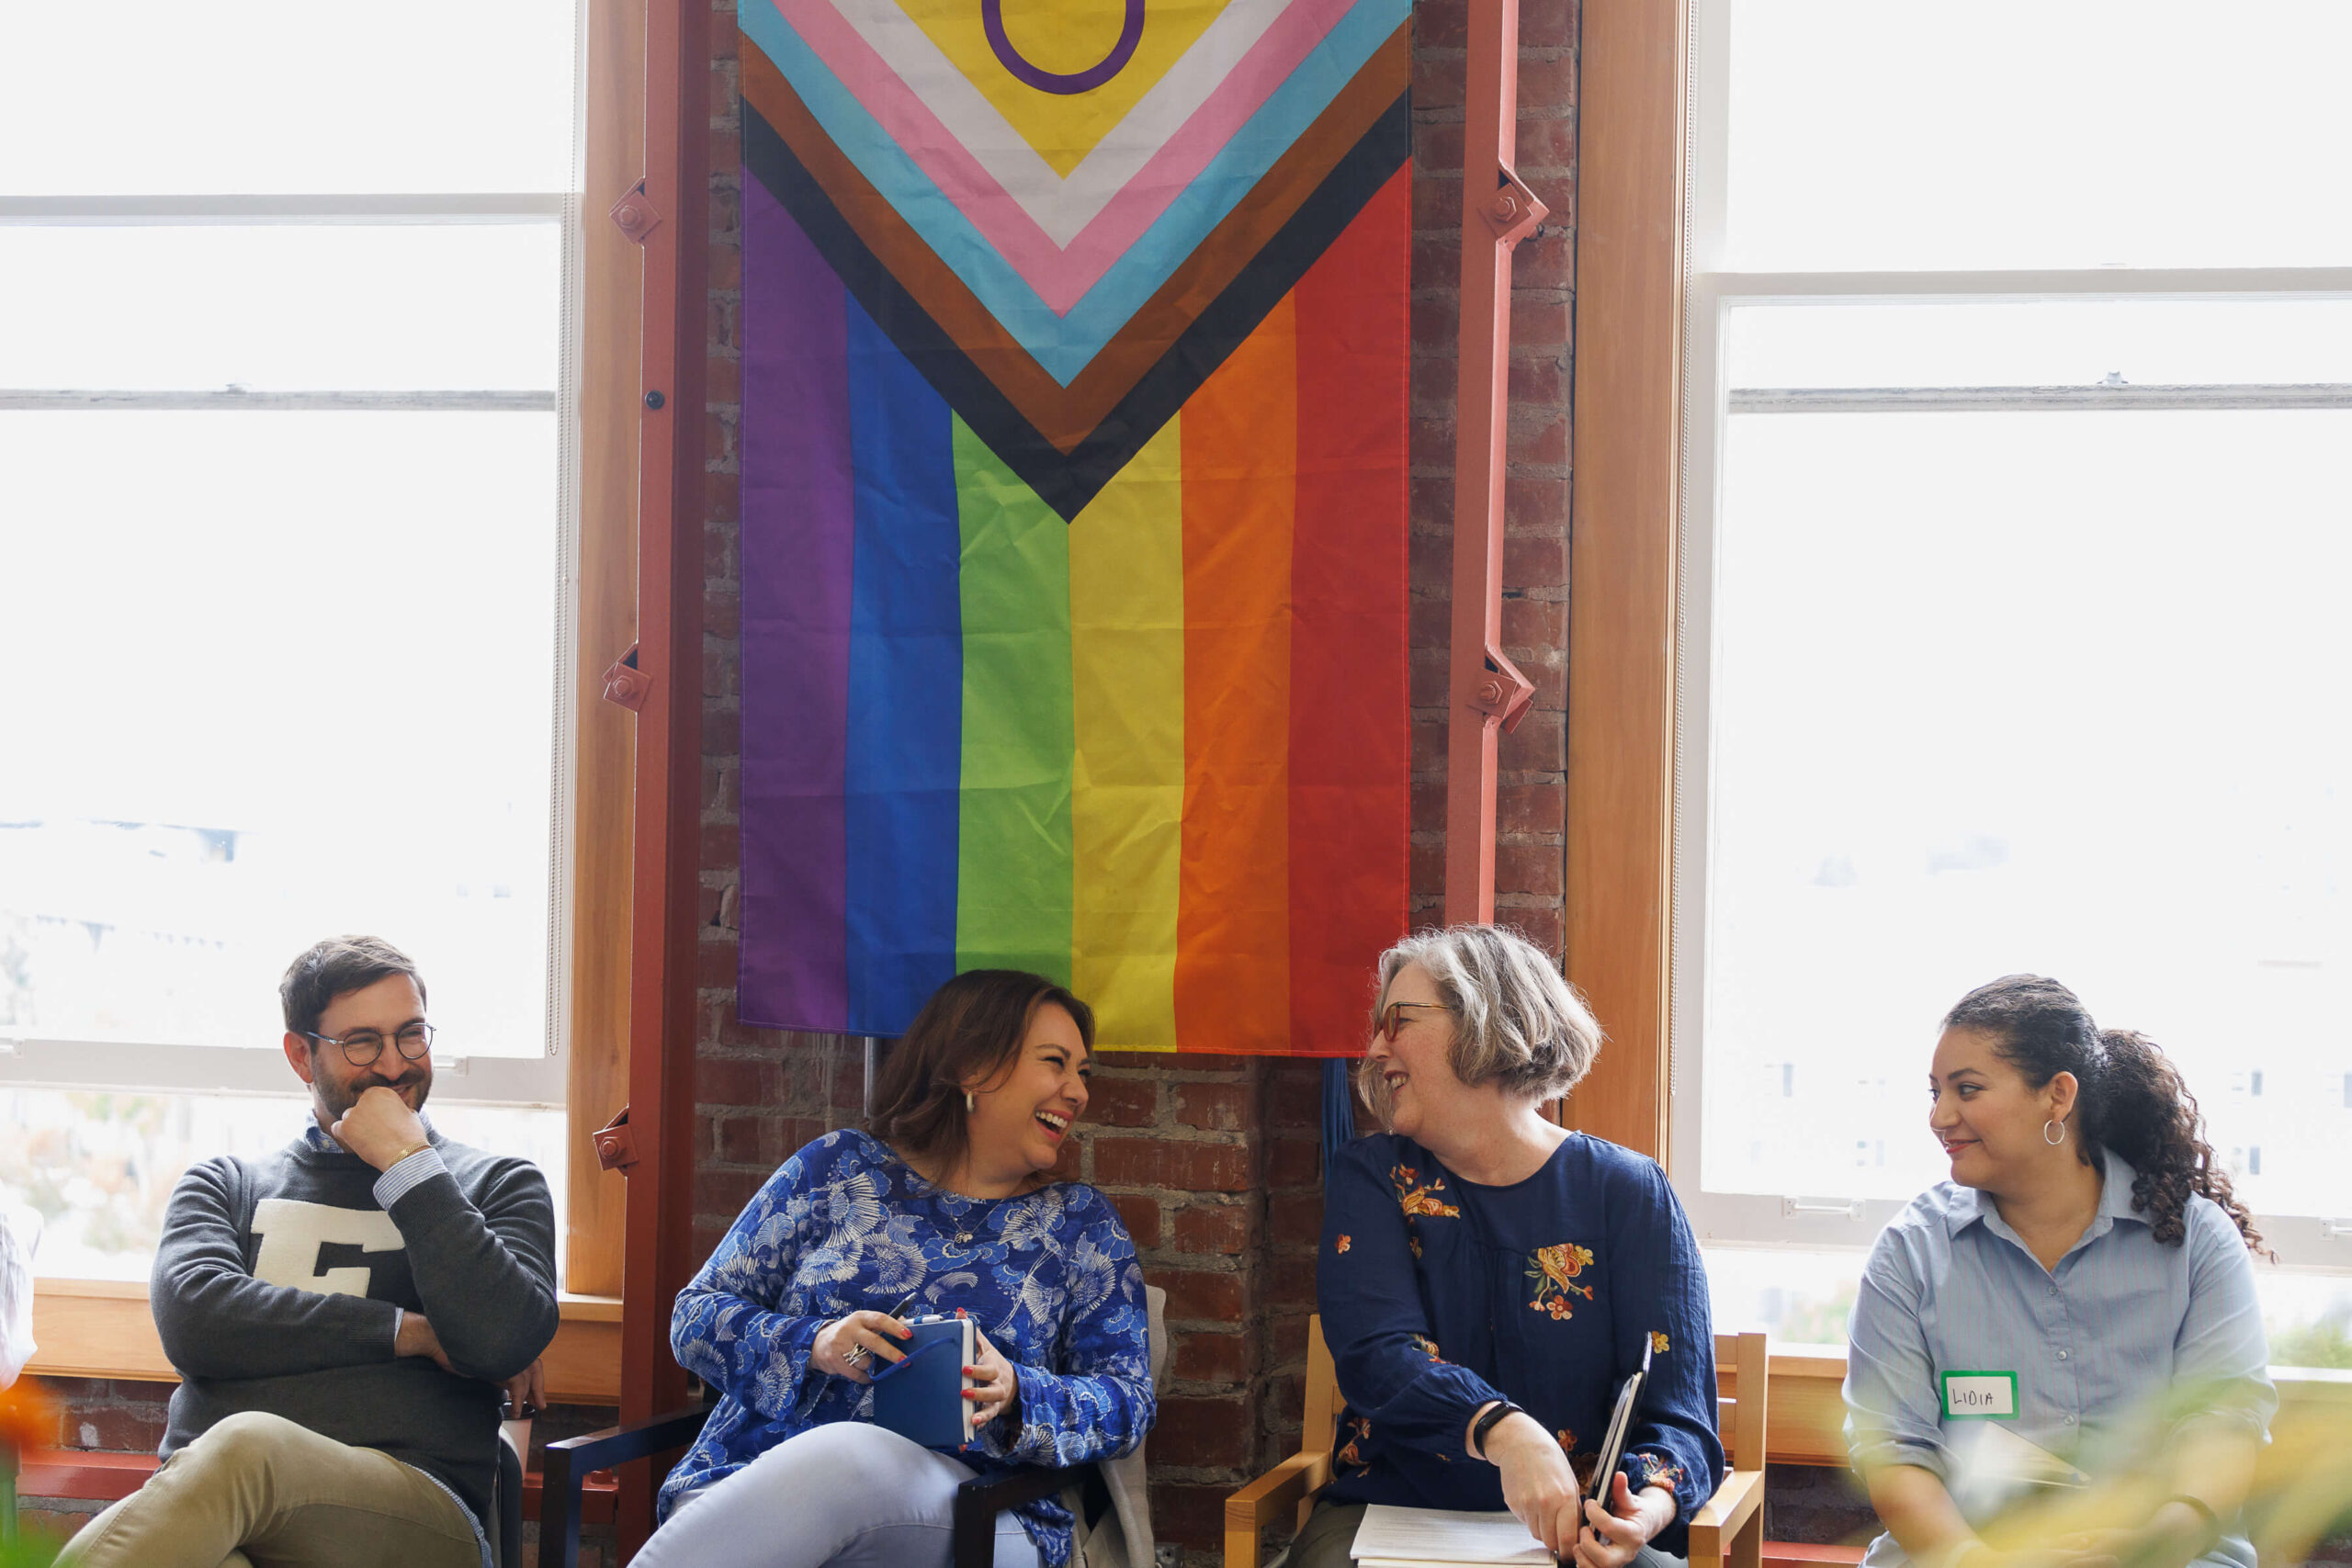 MSC's staffers sit in front of a brick wall with large windows and a pride flag hanging on it